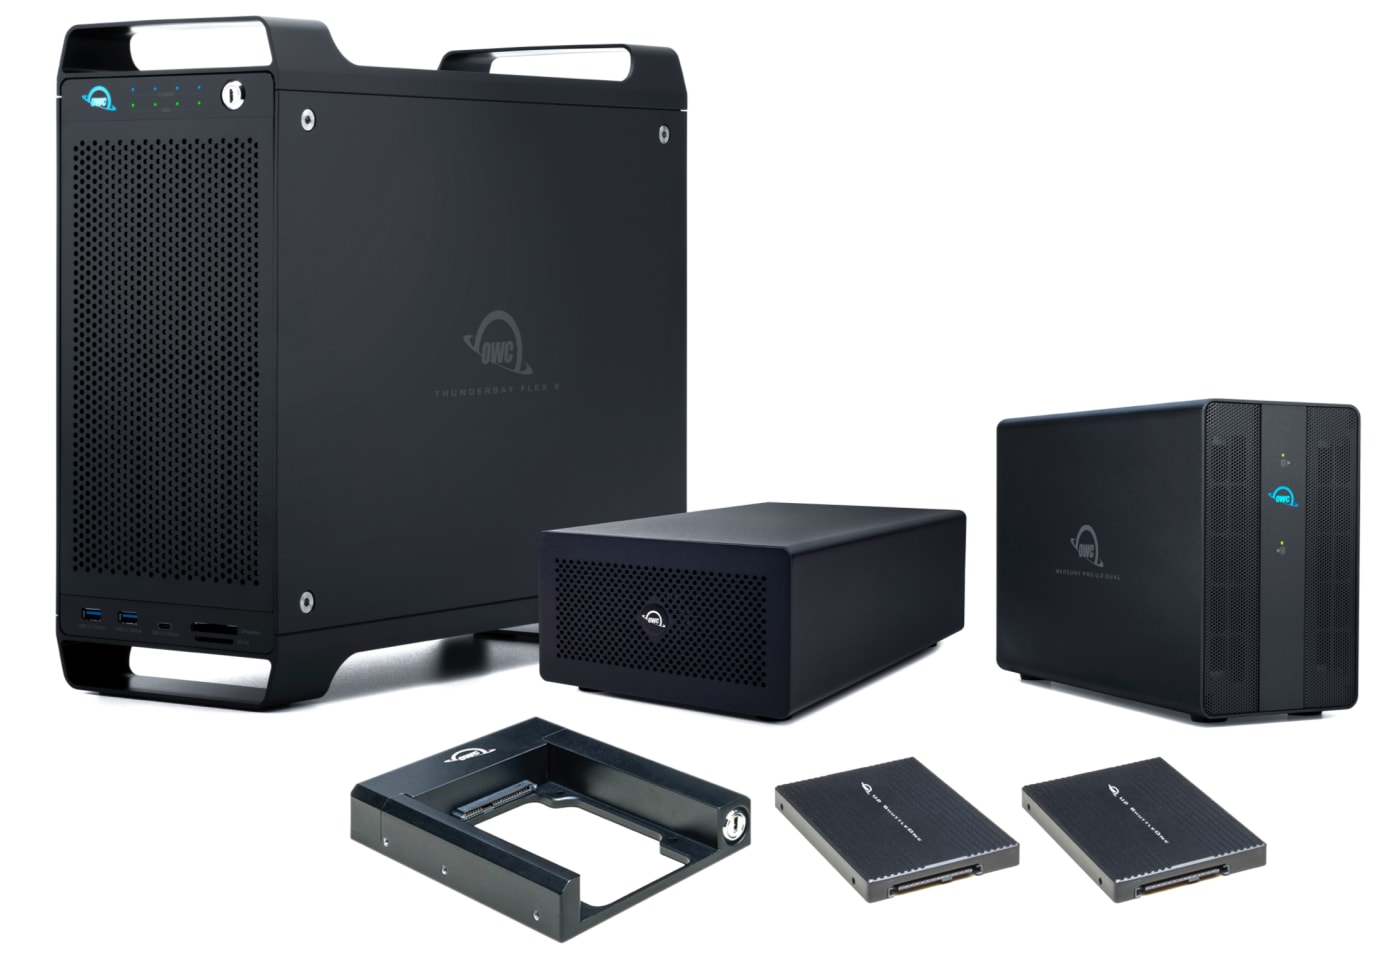 4.0TB OWC External SSD Storage Drive Upgrade for Sony PlayStation 4